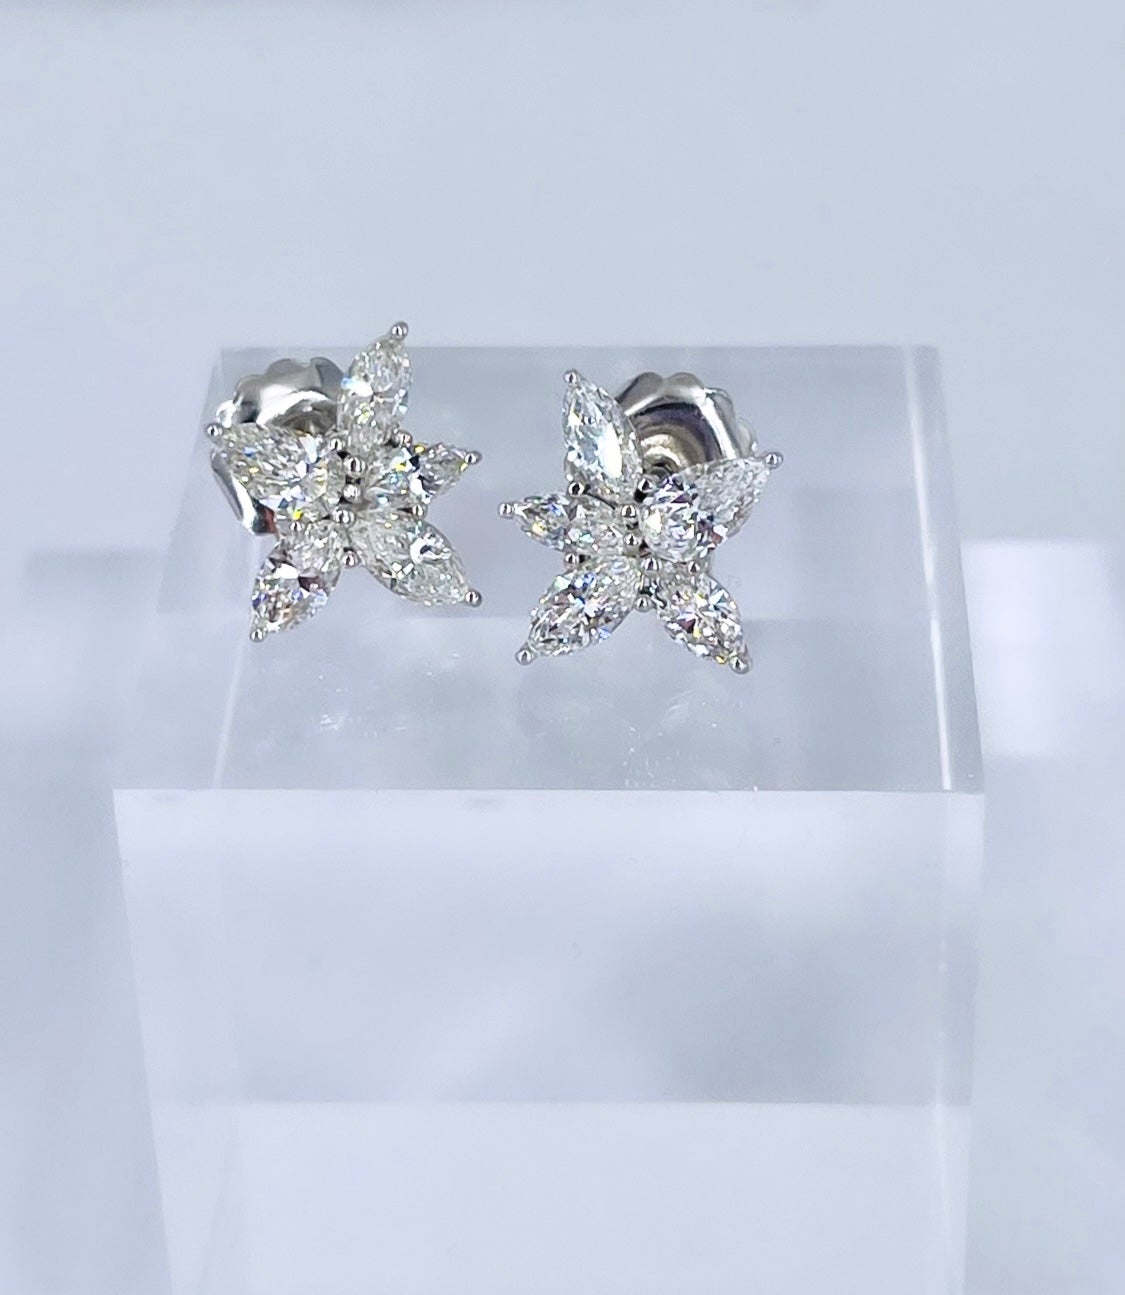 These glamorous earrings by J. Birnbach are a timeless style that adds elegance and sparkle to any ensemble. Perfect for a black tie affair or for a bride, pear shape and marquise diamonds create a lively starburst design. Crafted in 18K white gold,